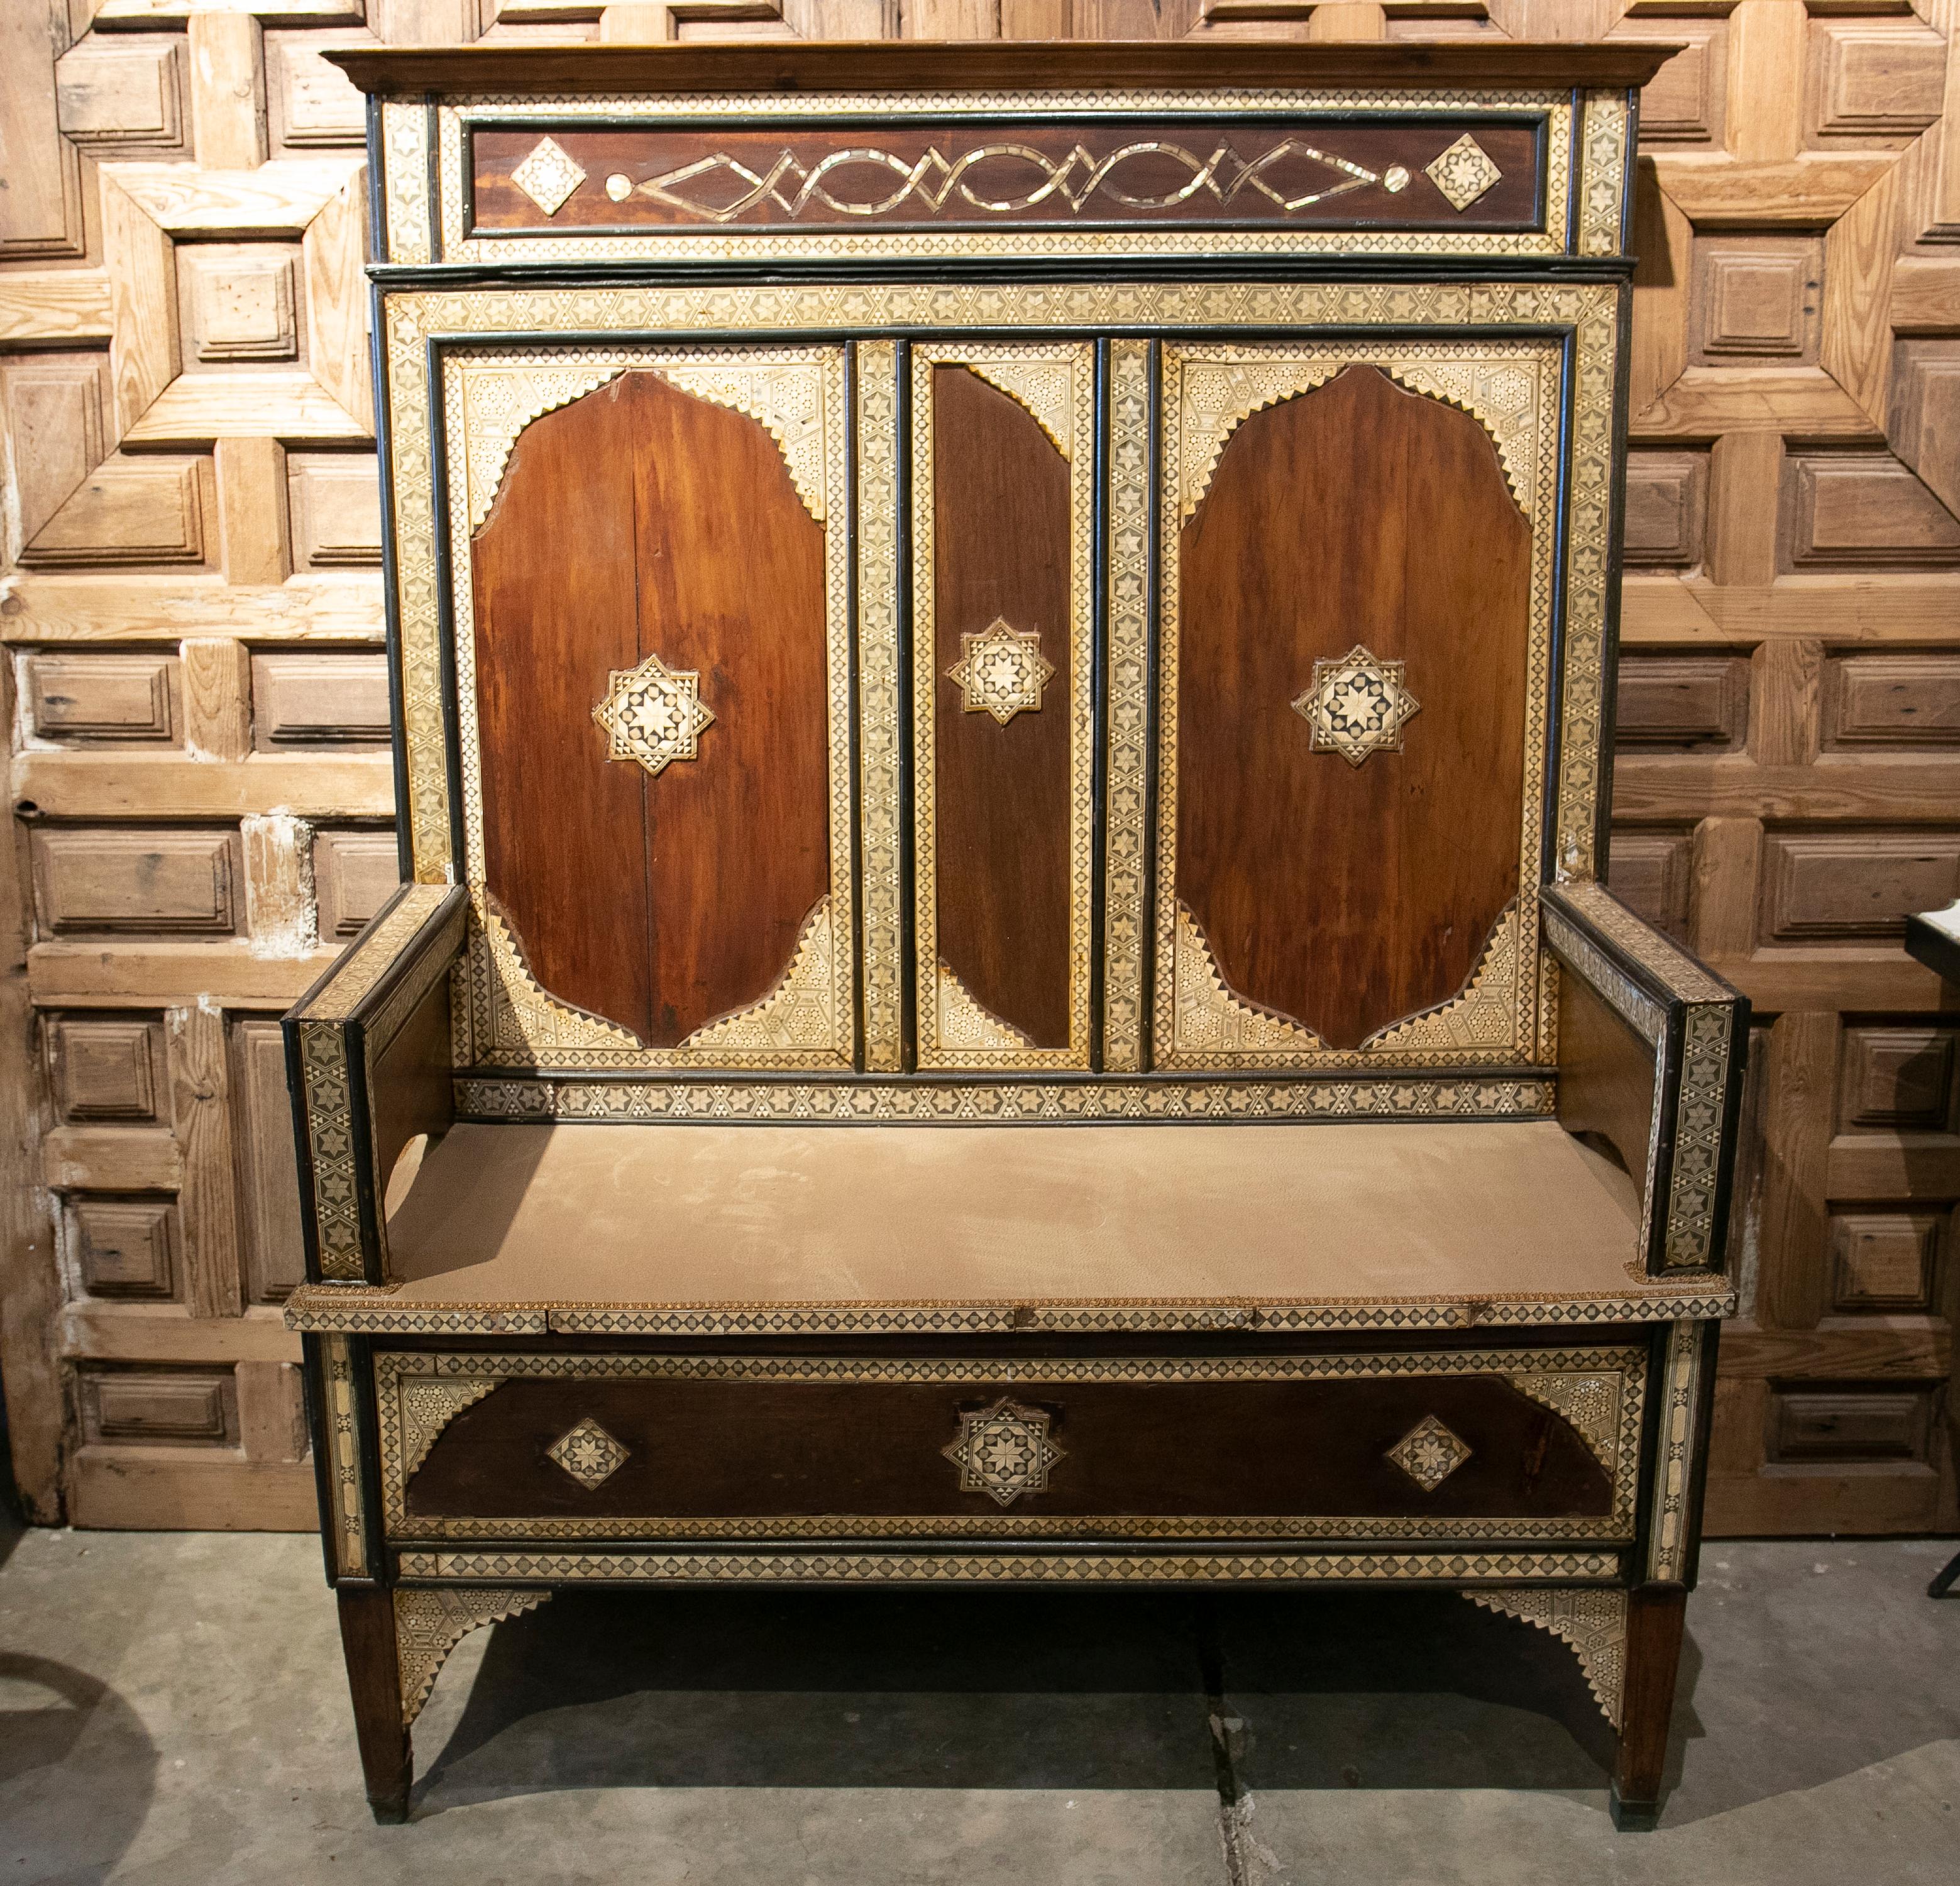 Oriental wooden bench with high backrest and inlays.